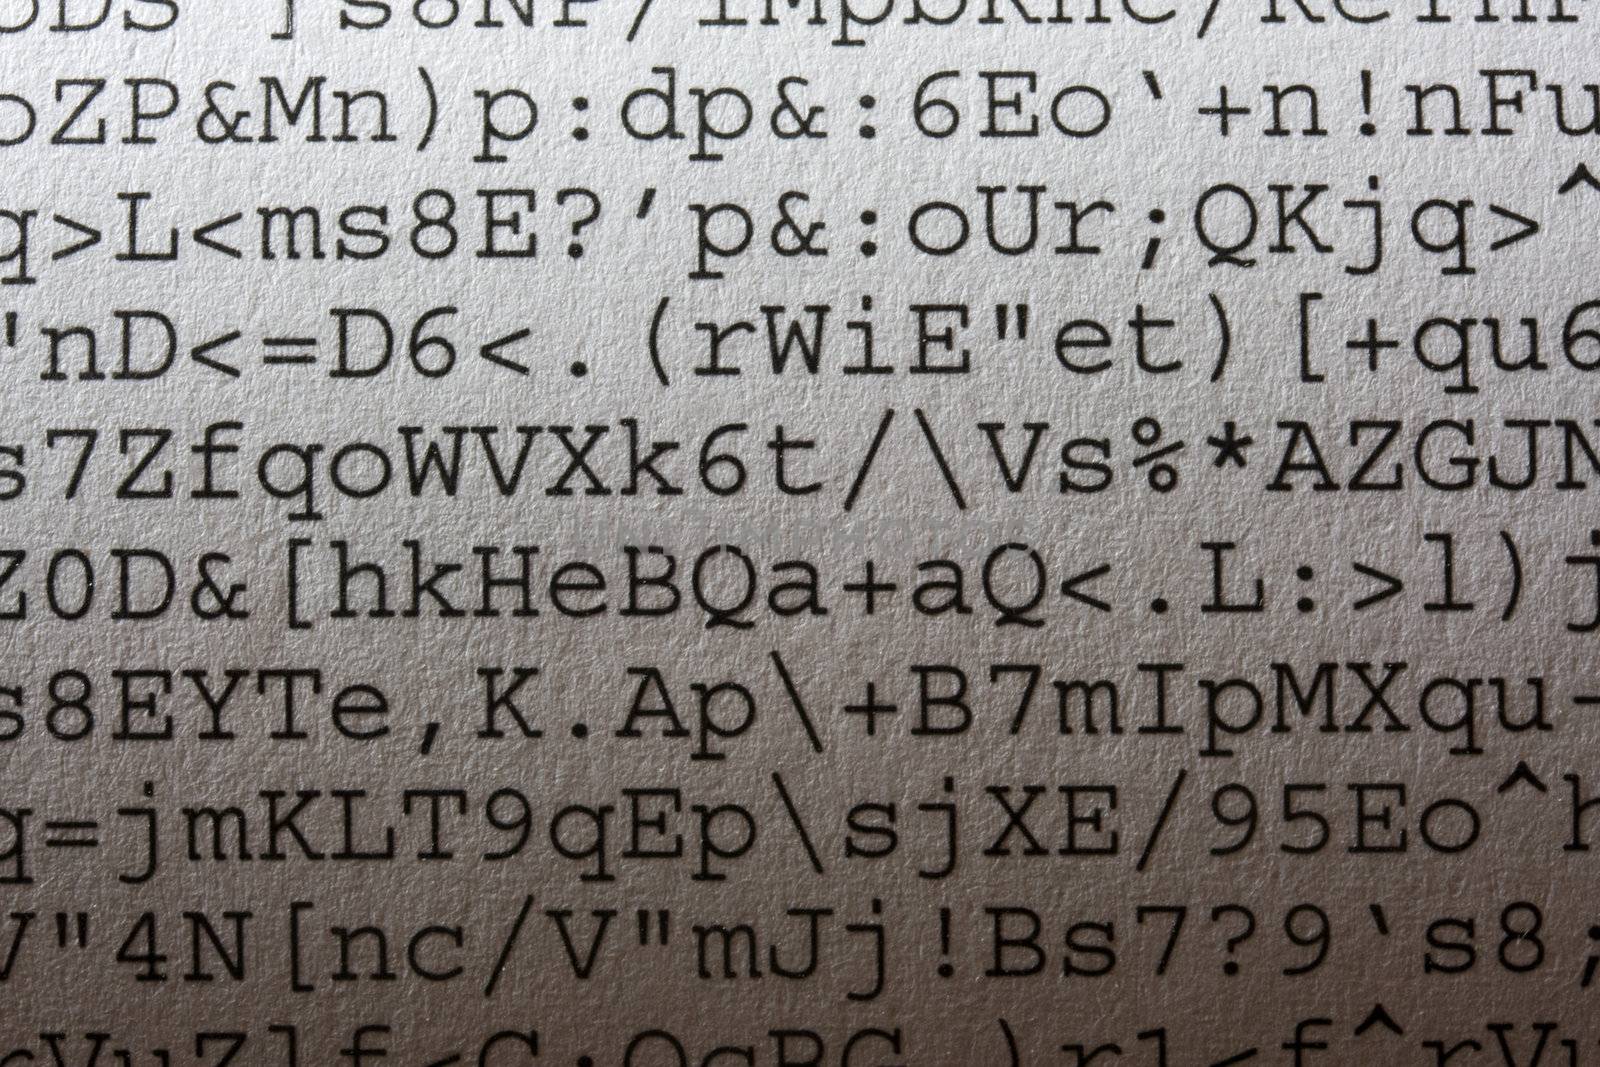 computer gibberish printout - text without sense produced by a faulty software or user mistake